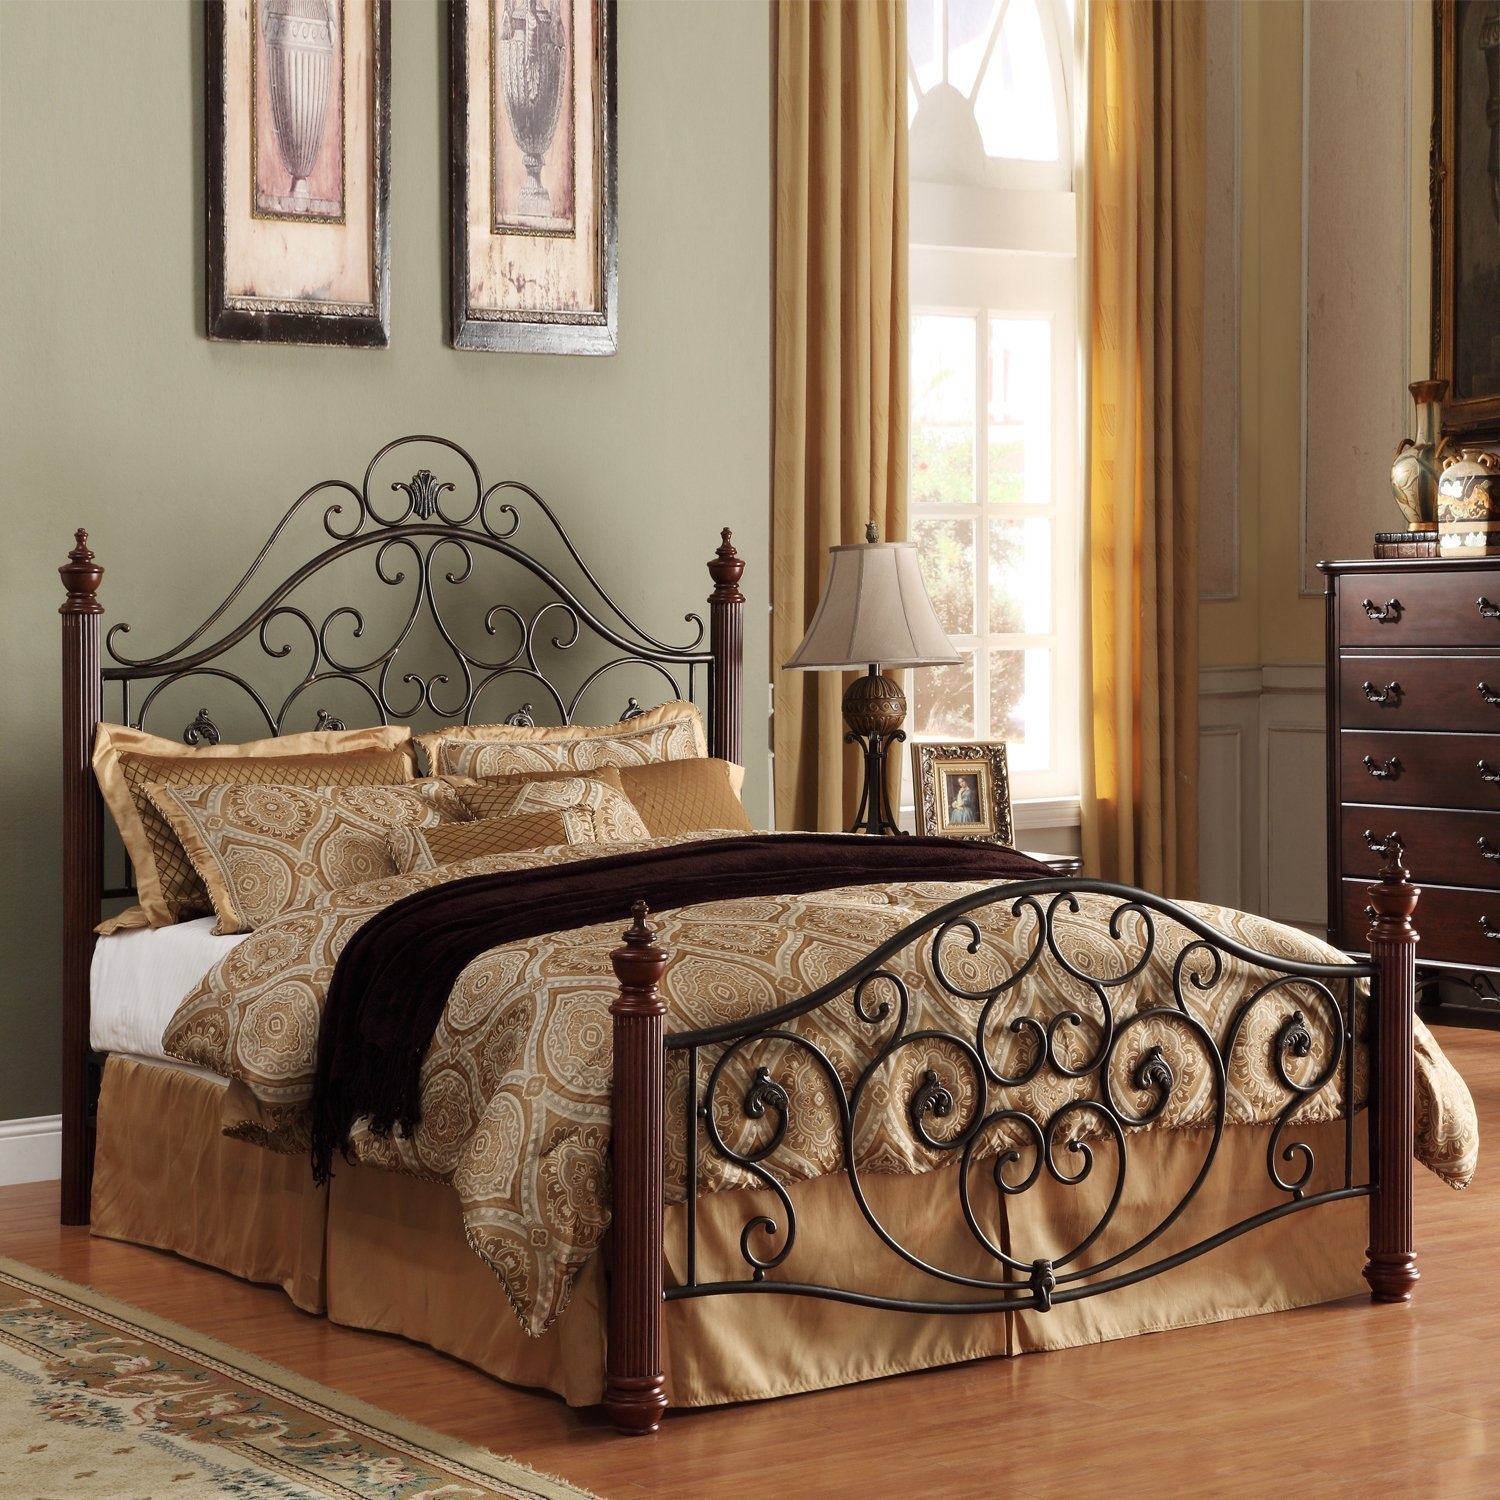 Madera deco scrollwork queen size metal bed